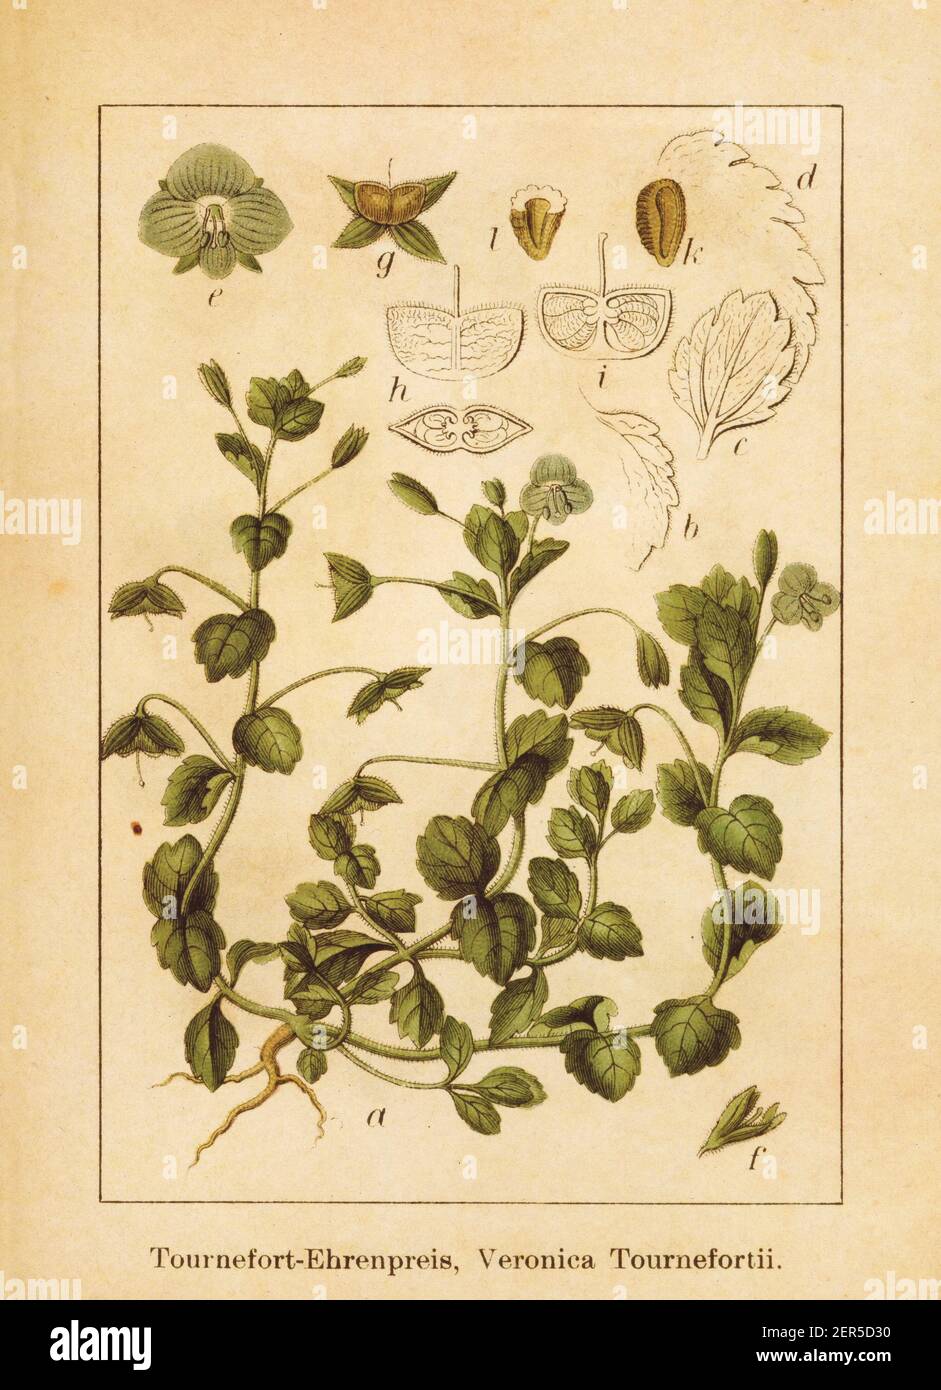 Antique illustration of a veronica persica also known as veronica tournefortii, Persian speedwell, large field speedwell, bird's-eye speedwell or wint Stock Photo